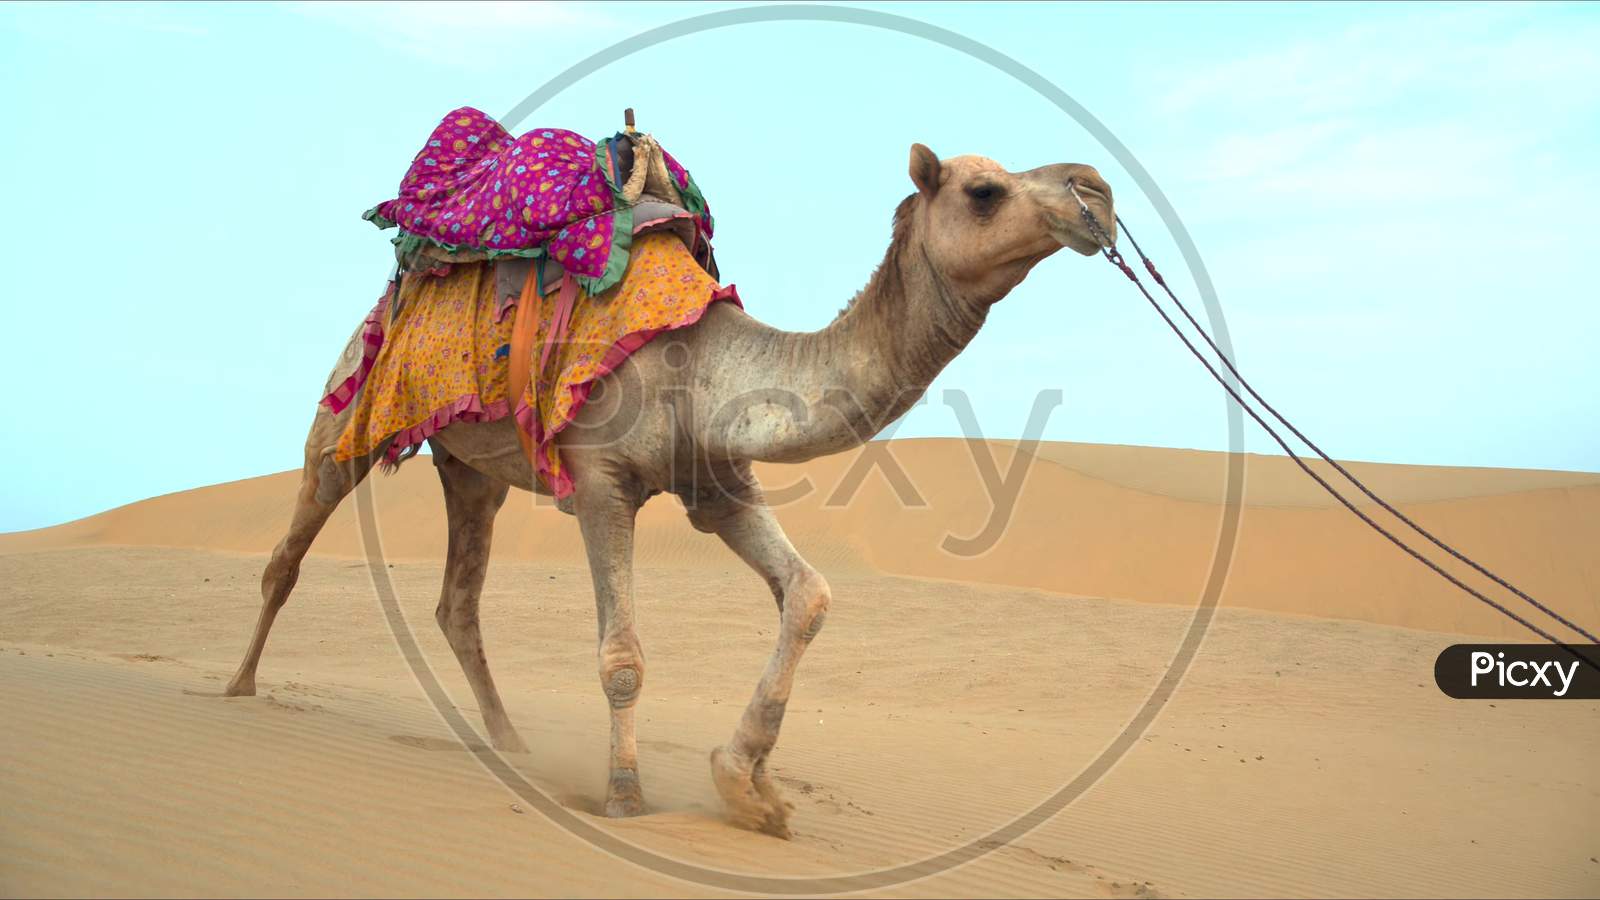 Free: Camel With Multicolored Saddle - nohat.cc